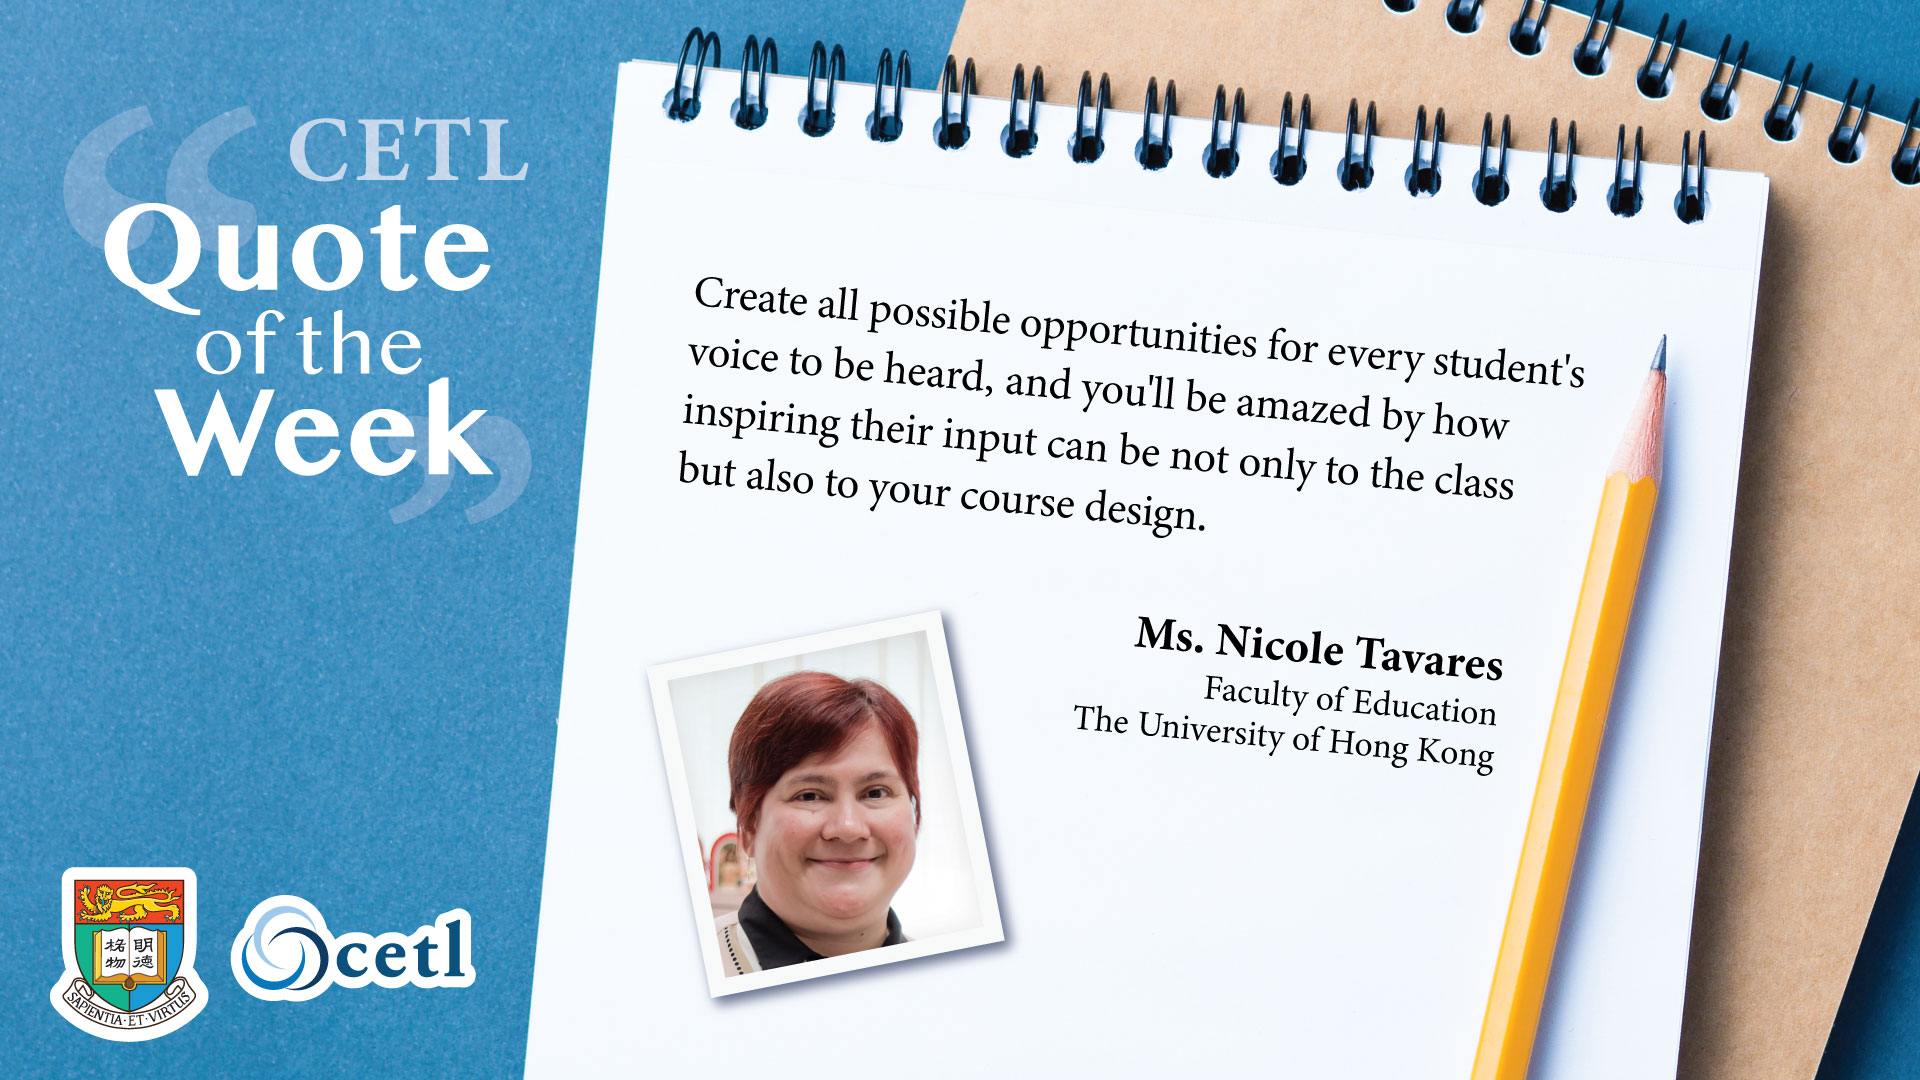 Ms. Nicole Tavares - Create all possible opportunities for every student's voice to be heard, and you'll be amazed by how inspiring their input can be not only to the class but also to your course design.